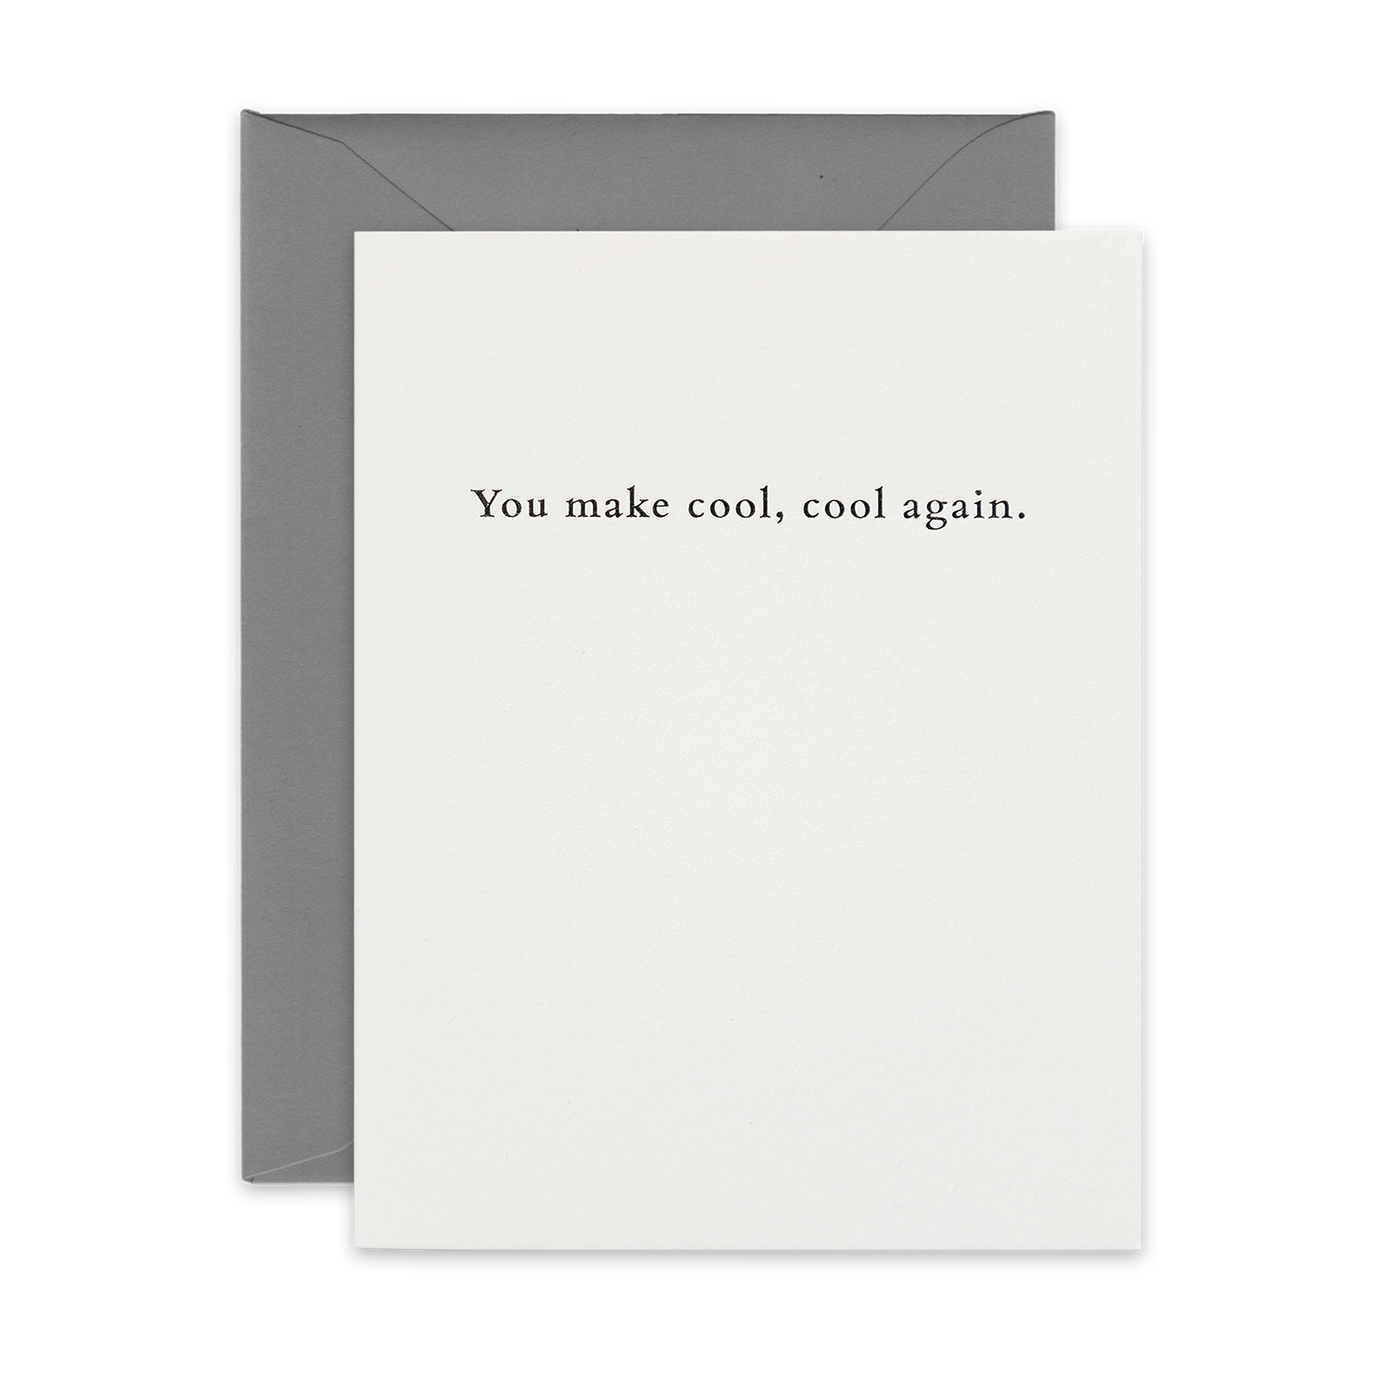 Black foil letterpress greeting card by beknown. You make cool, cool again.